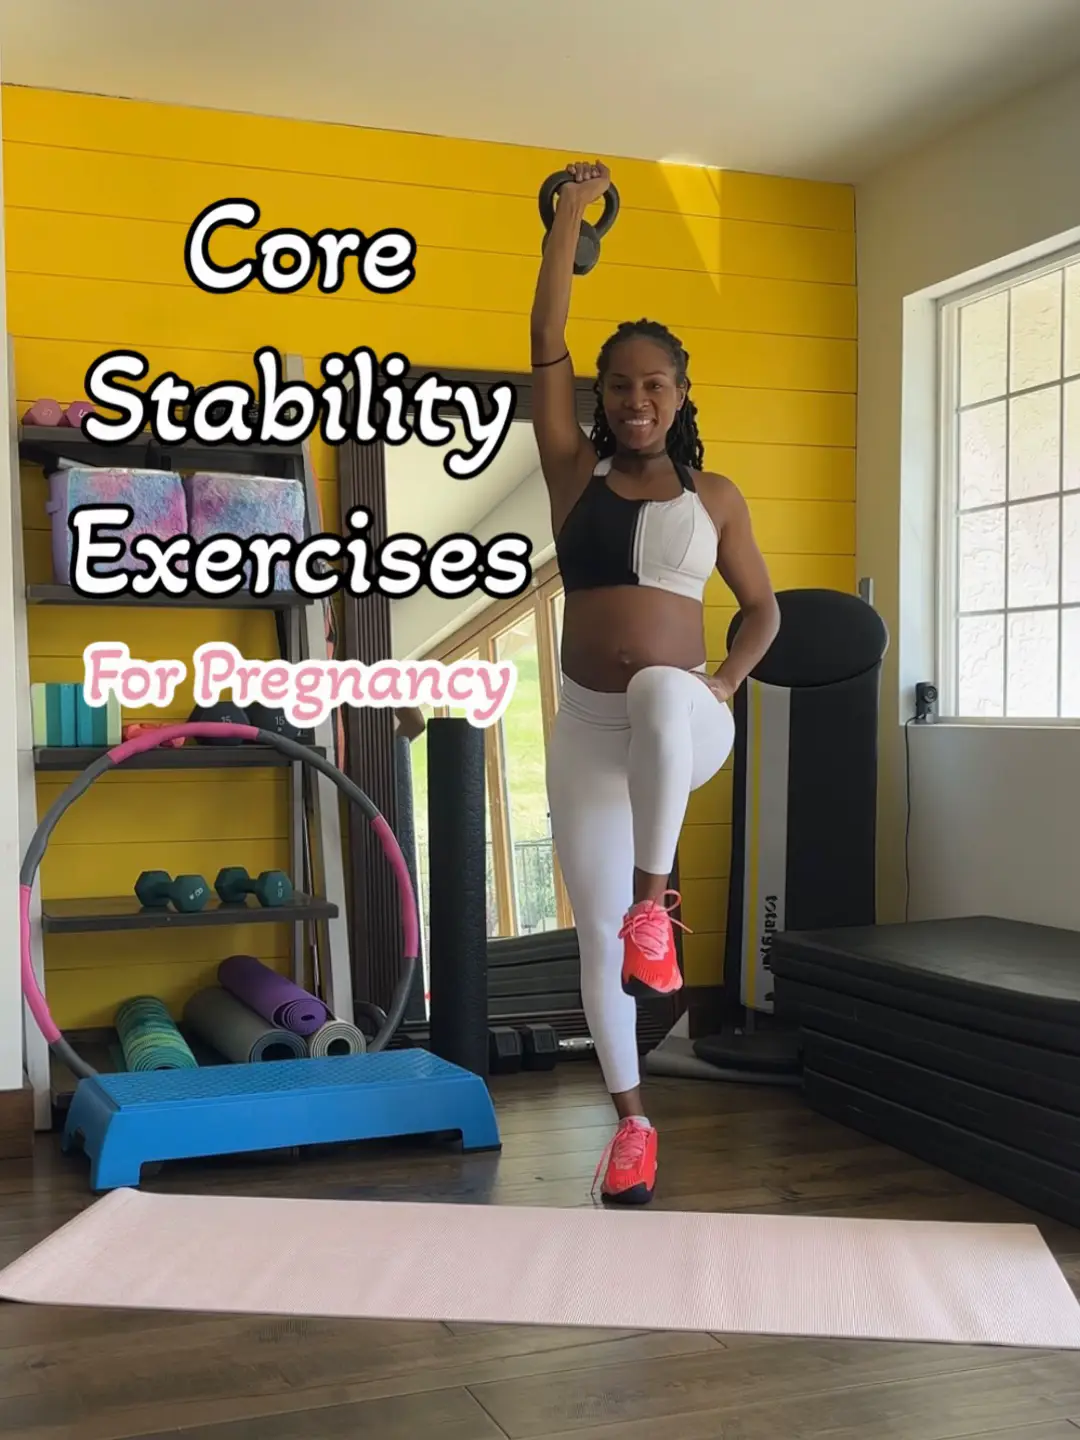 Core Stability Exercises for Pregnancy, Gallery posted by Alexis Nielsen